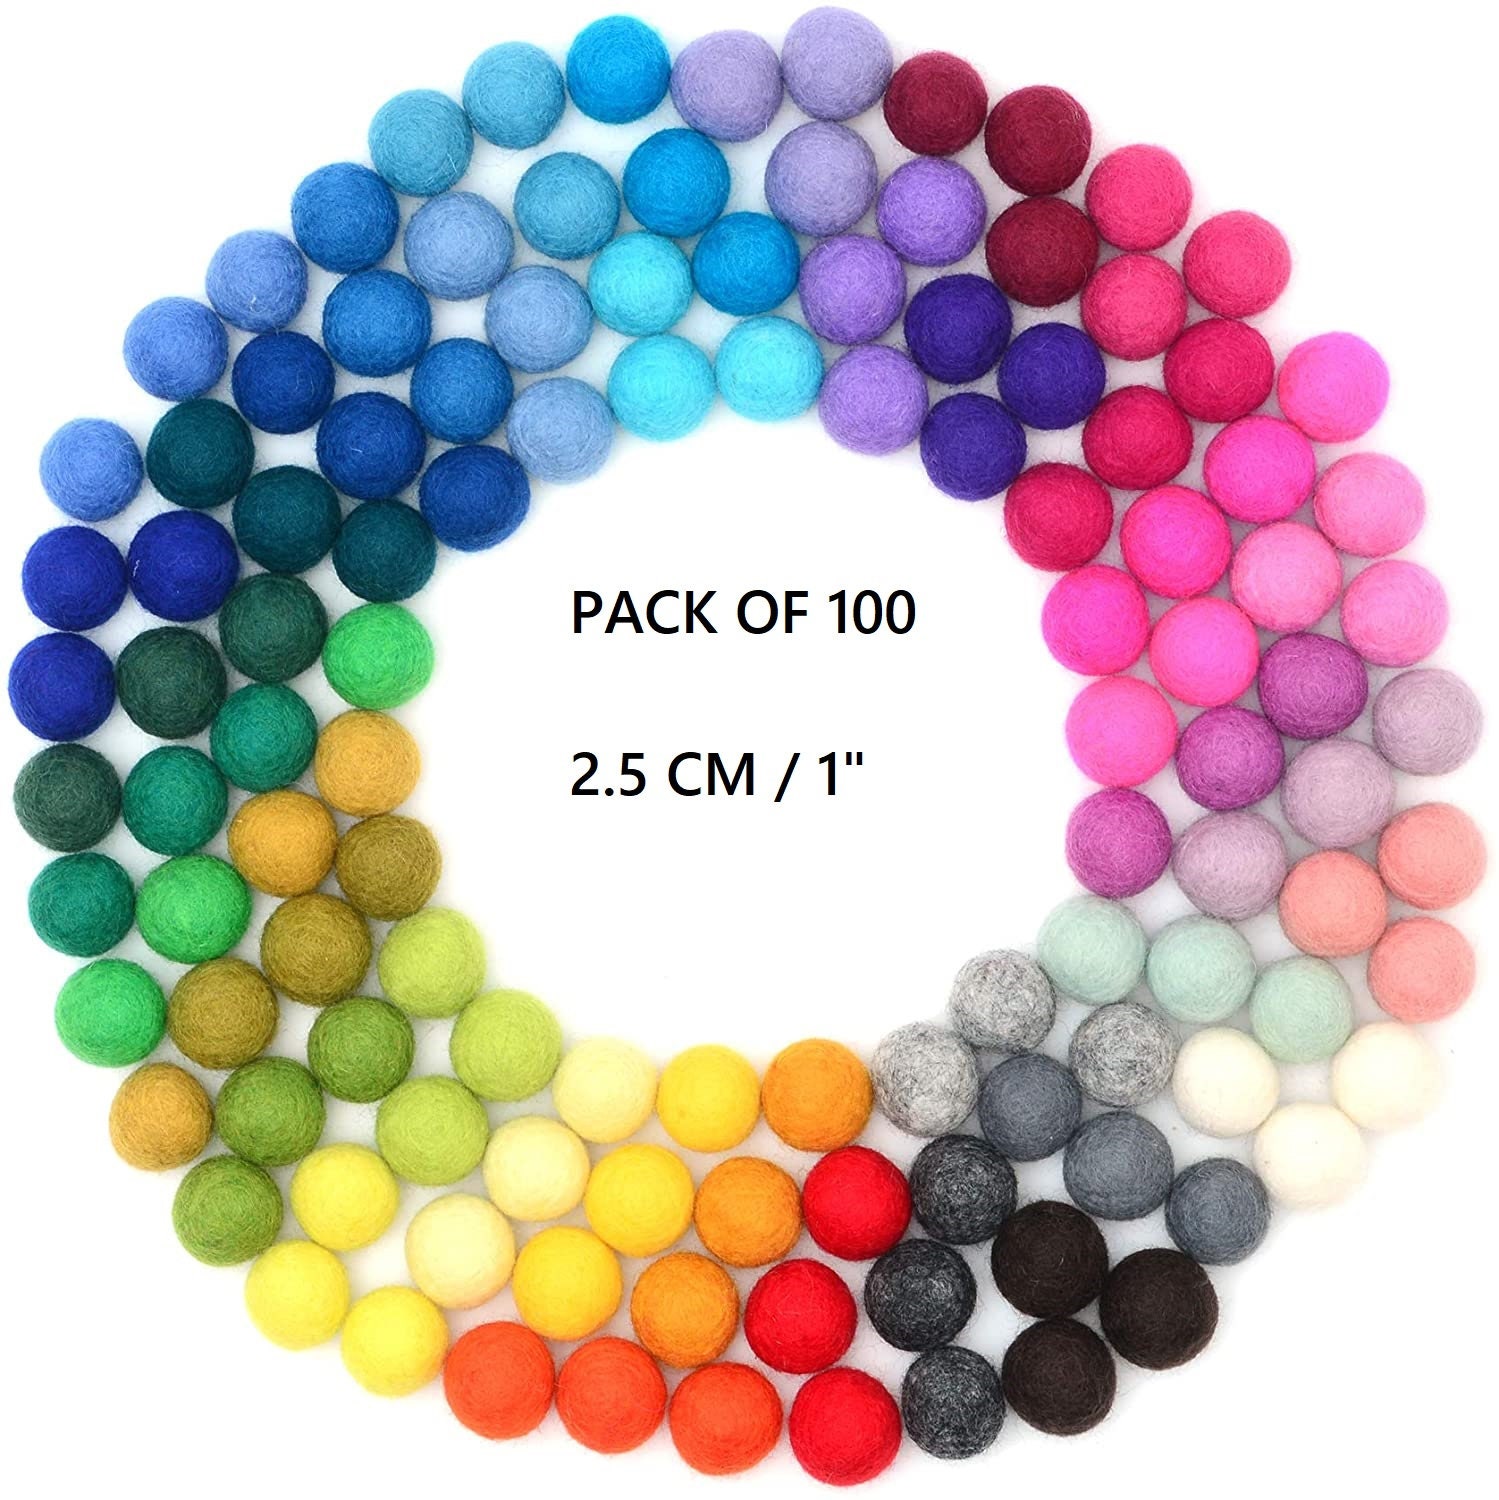 Multicolor Puffy Pompoms Gift Set for Kids & Adults Best Colored Cotton 1 cm Puff Balls Pompom for DIY Crafts Arts and Decorations Hats Incraftables 1500 Pcs Pom Poms with Googly Eyes 